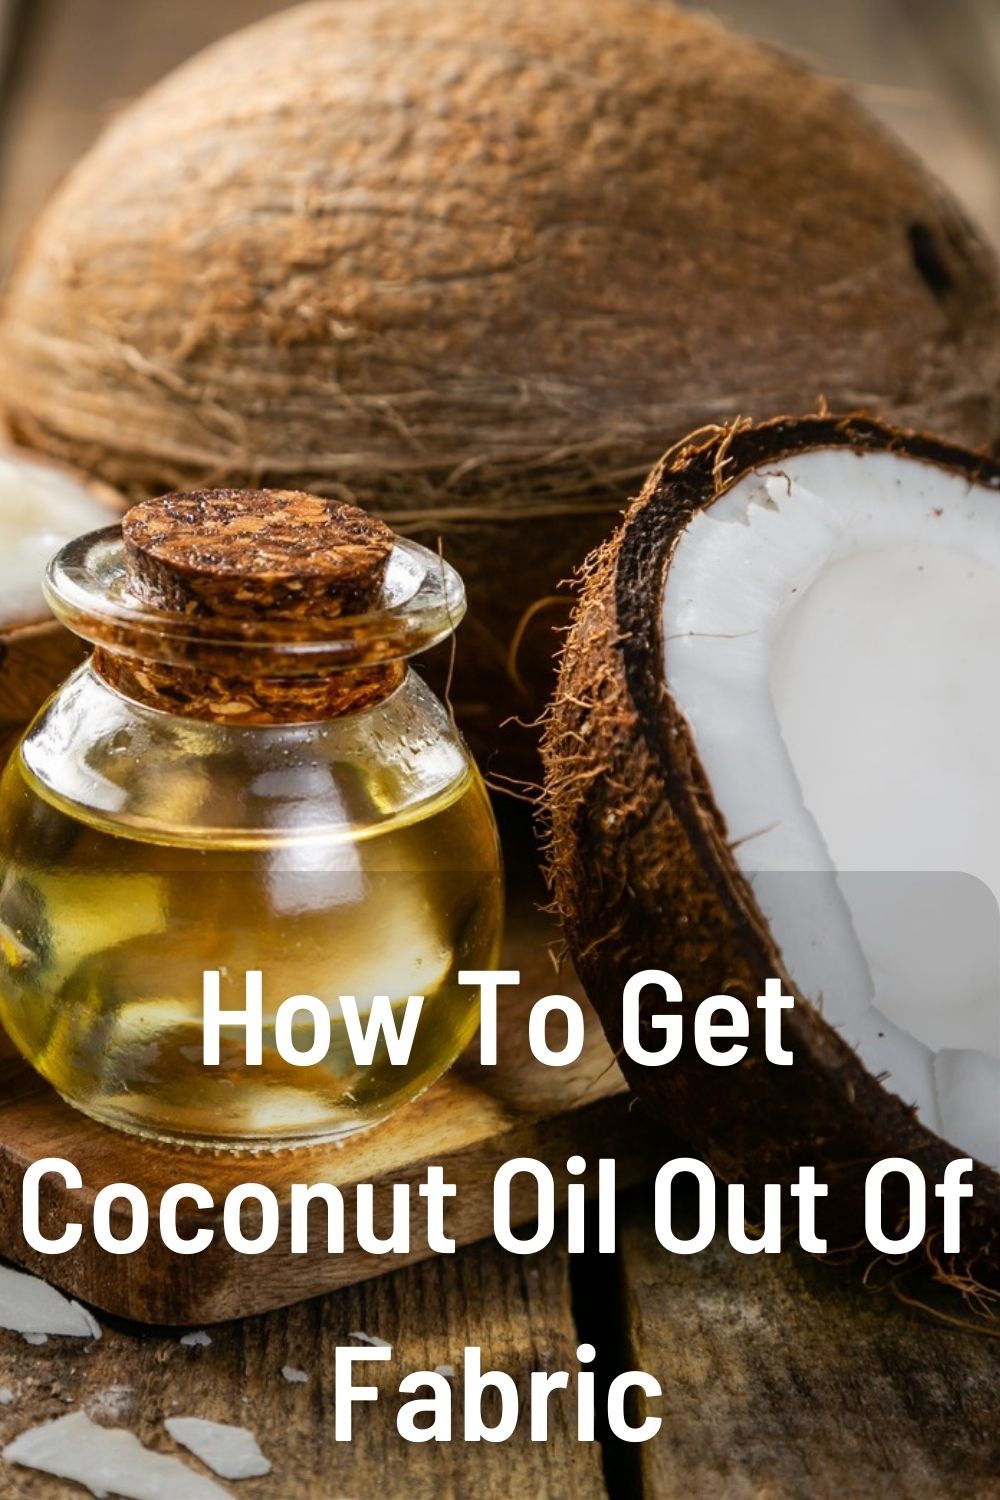 How To Get Coconut Oil Out Of Fabric